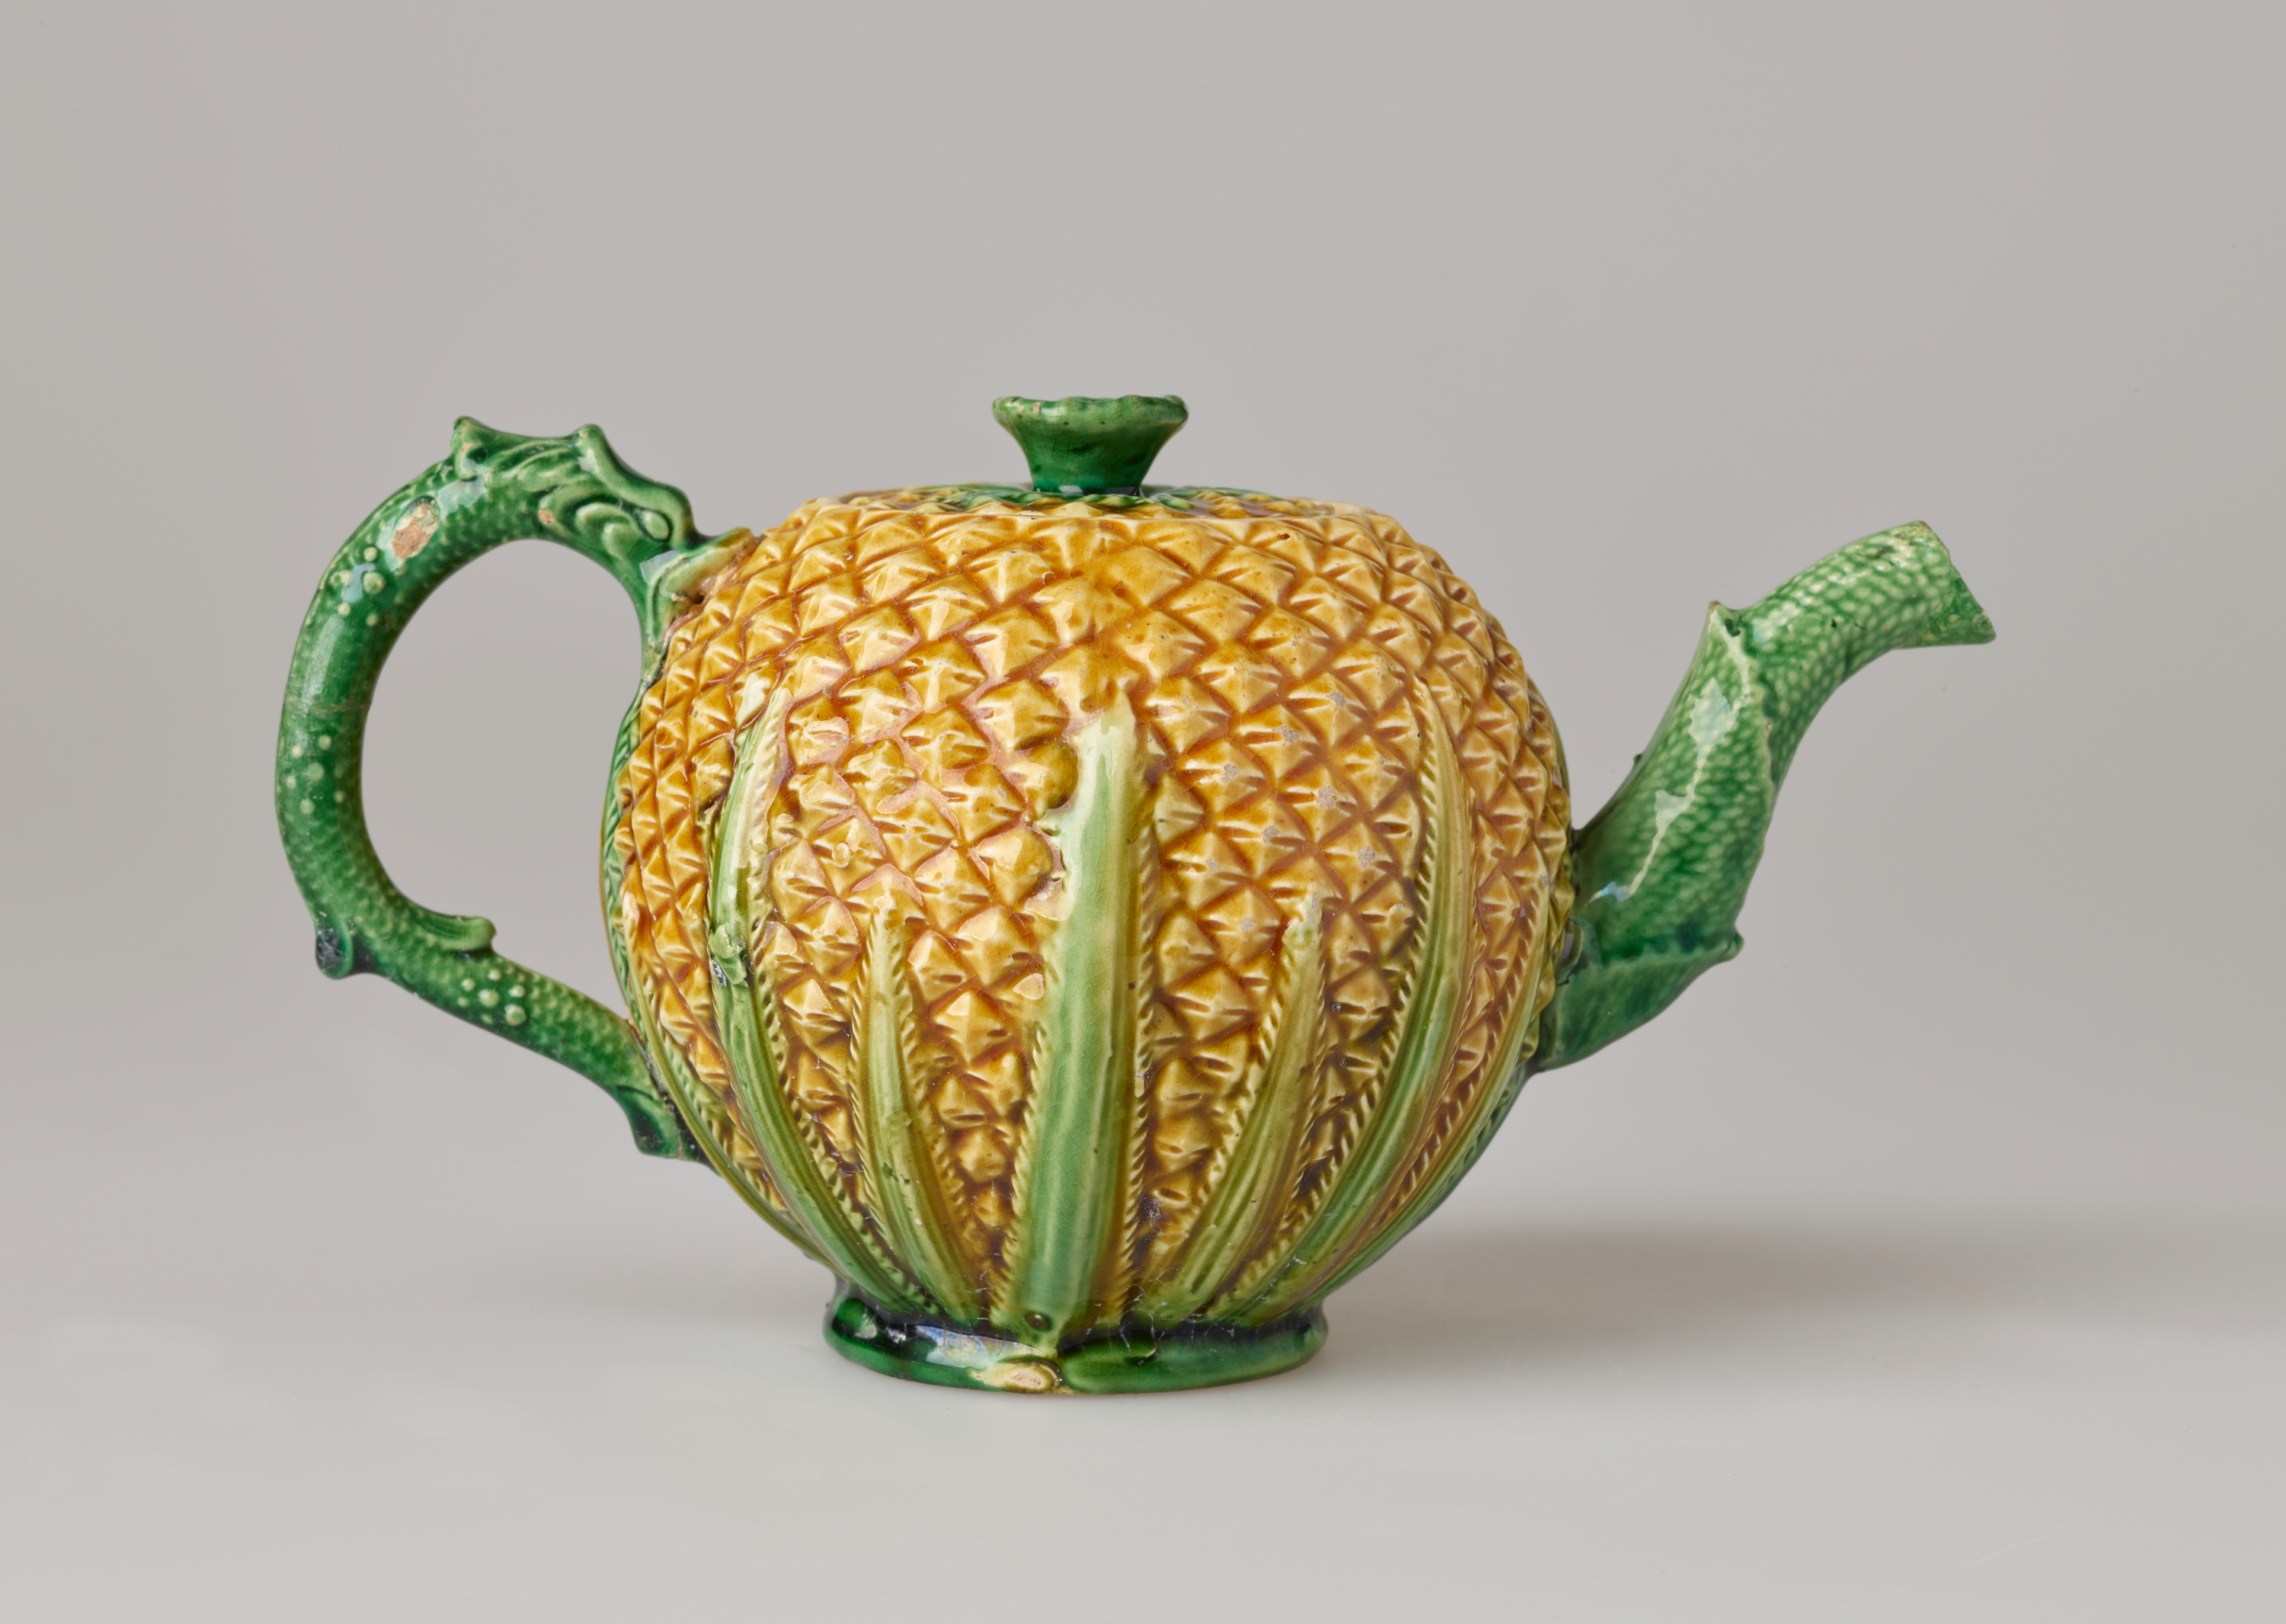 /A%20sculptural%20teapot%20with%20a%20yellow%20body%20and%20texture%20similar%20to%20a%20pineapple%2C%20green%20handle%2C%20foot%2C%20lid%2C%20and%20spout%20with%20a%20floral%20leaf%20or%20stem%20like%20decoration%20and%20texture.